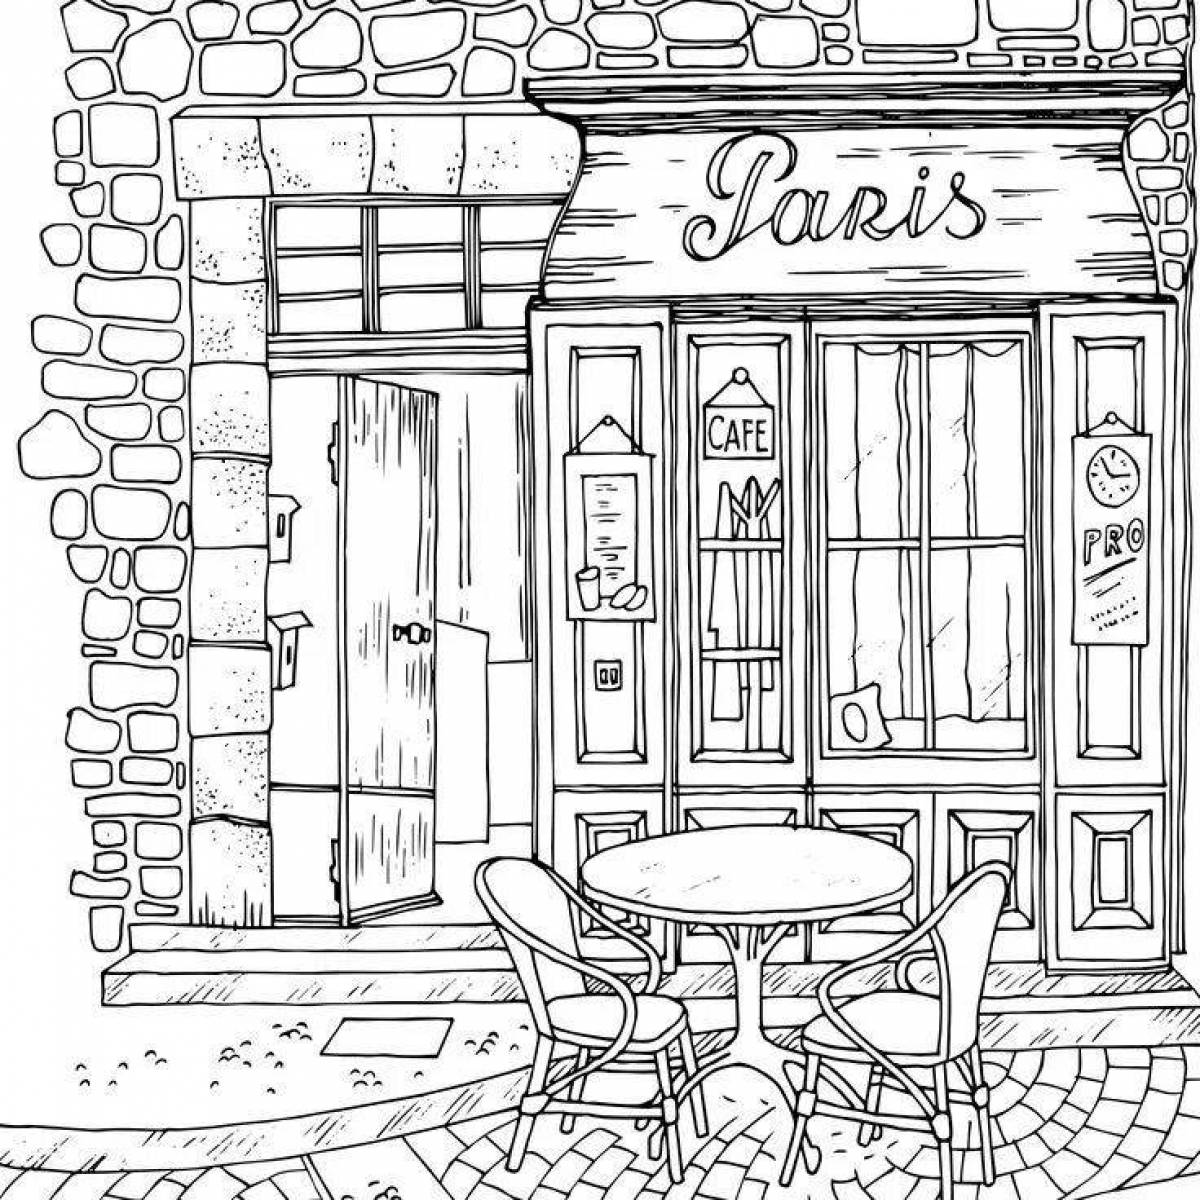 Cafe coloring book with bright colors